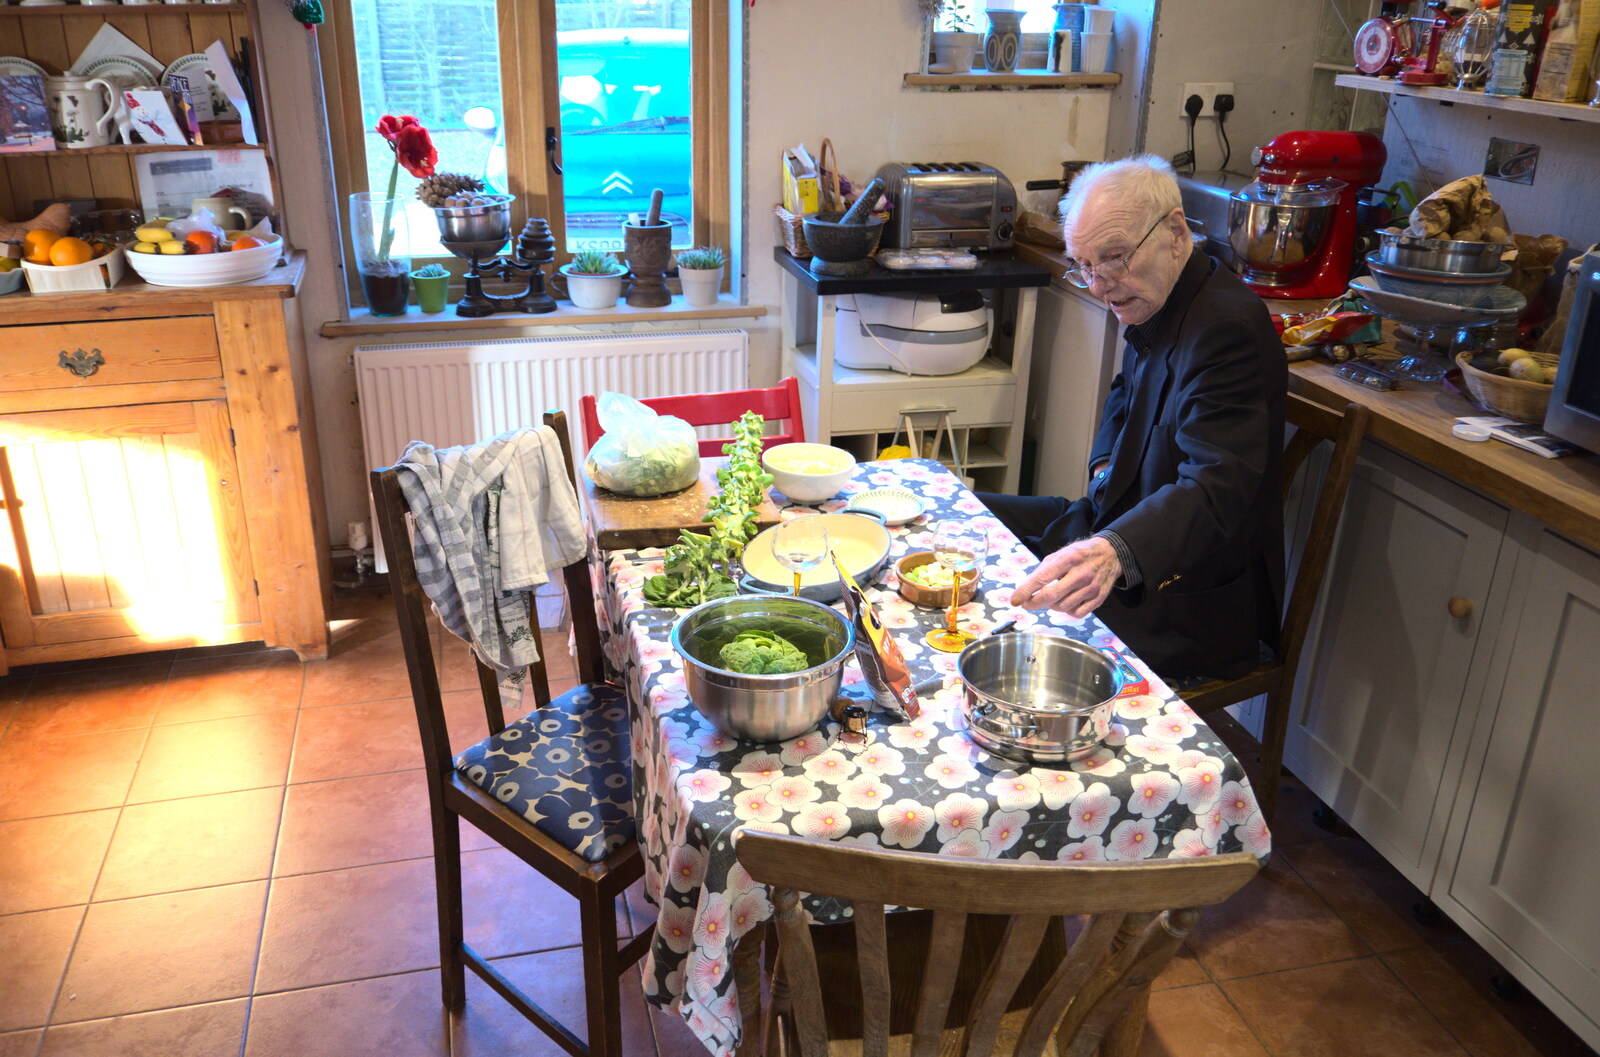 The G-Unit sits in the kitchen, watching sprouts from Christmas Day, Brome, Suffolk - 25th December 2020